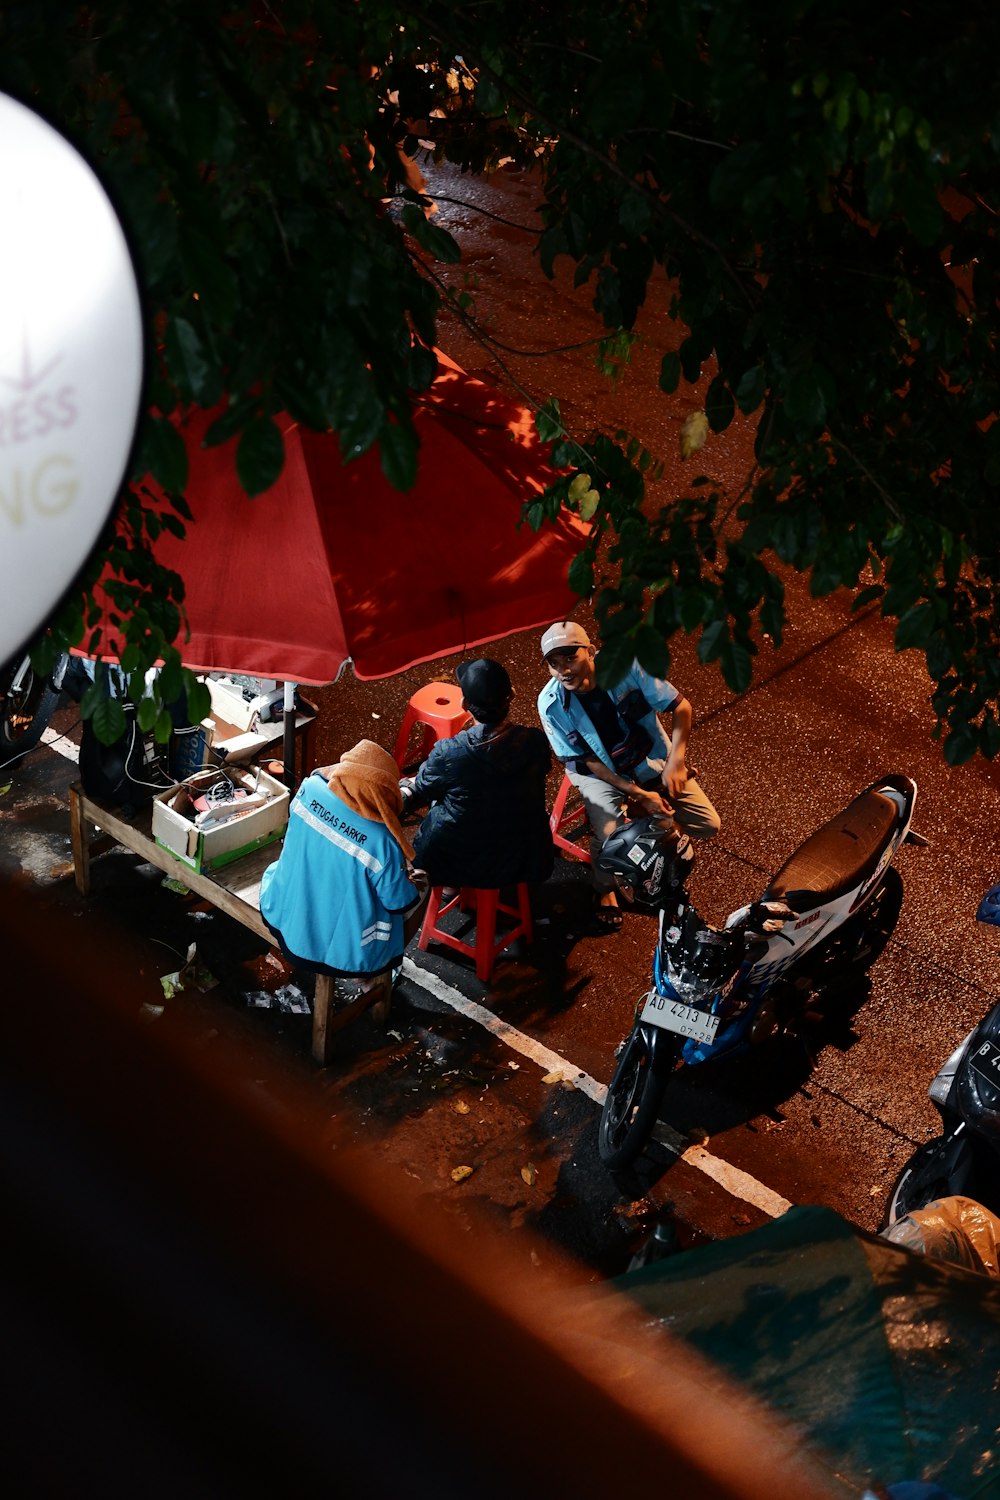 a group of people sitting at a table under umbrellas